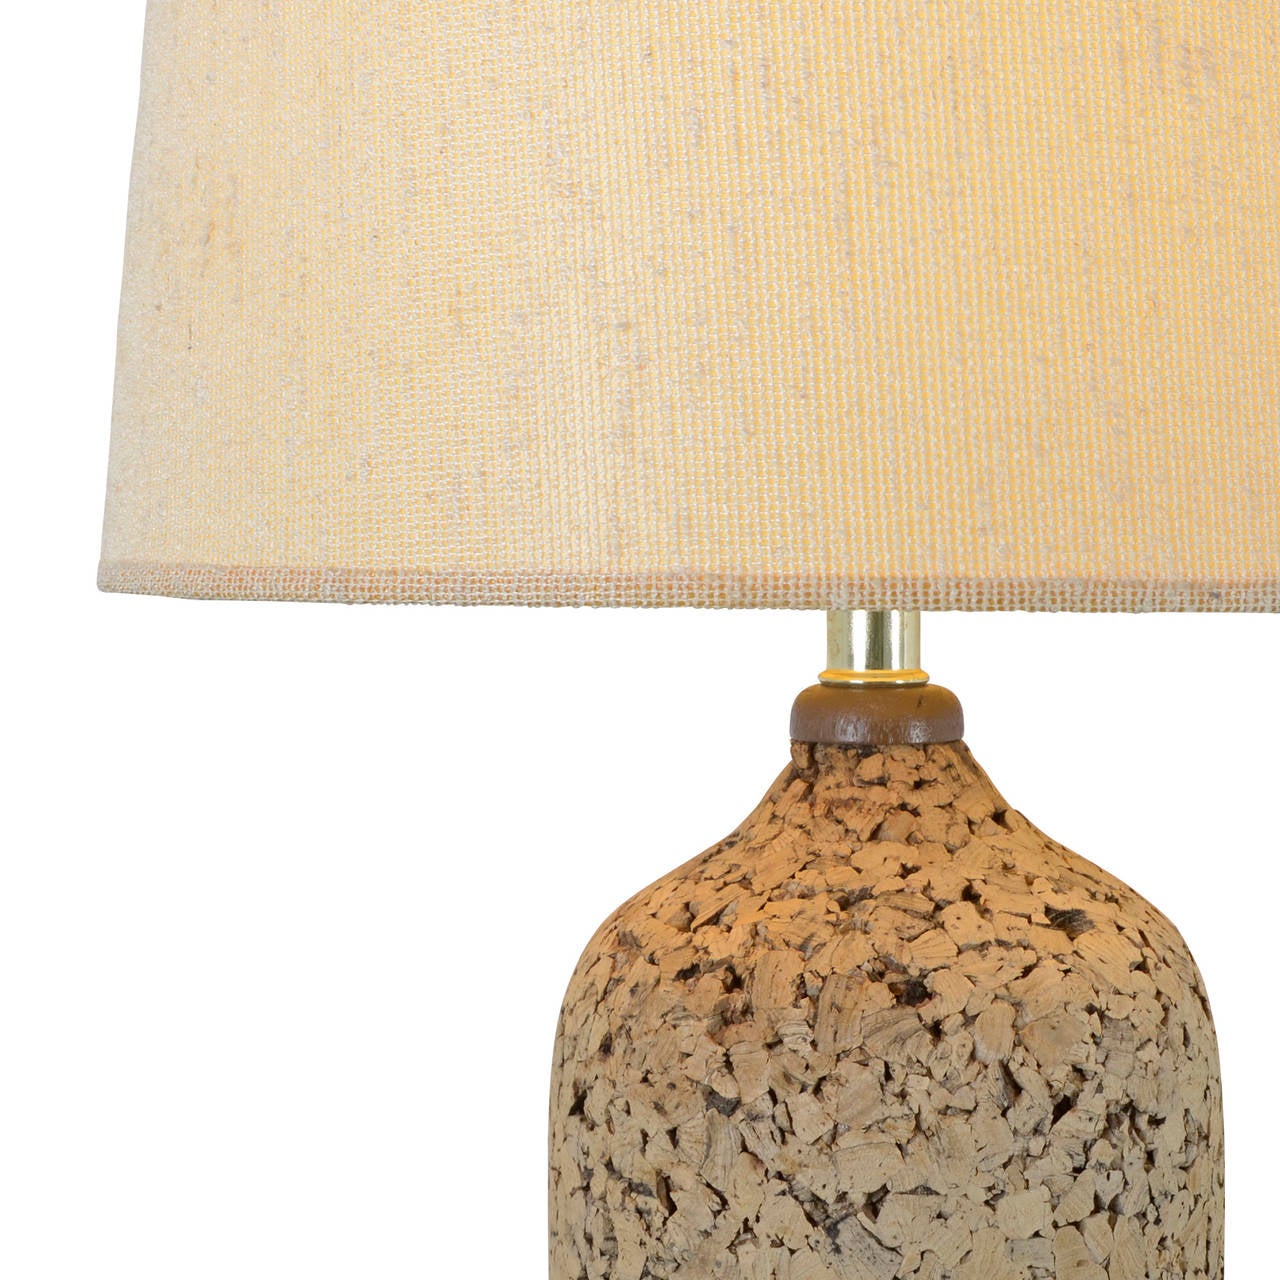 This table lamp hails from the mid-1960s, a time when the Mid-Century Modern minimalism was, like the country, loosening up and embracing its wild side. This groovy table lamp features a cork-coated body, set on a wooden base and capped with a large